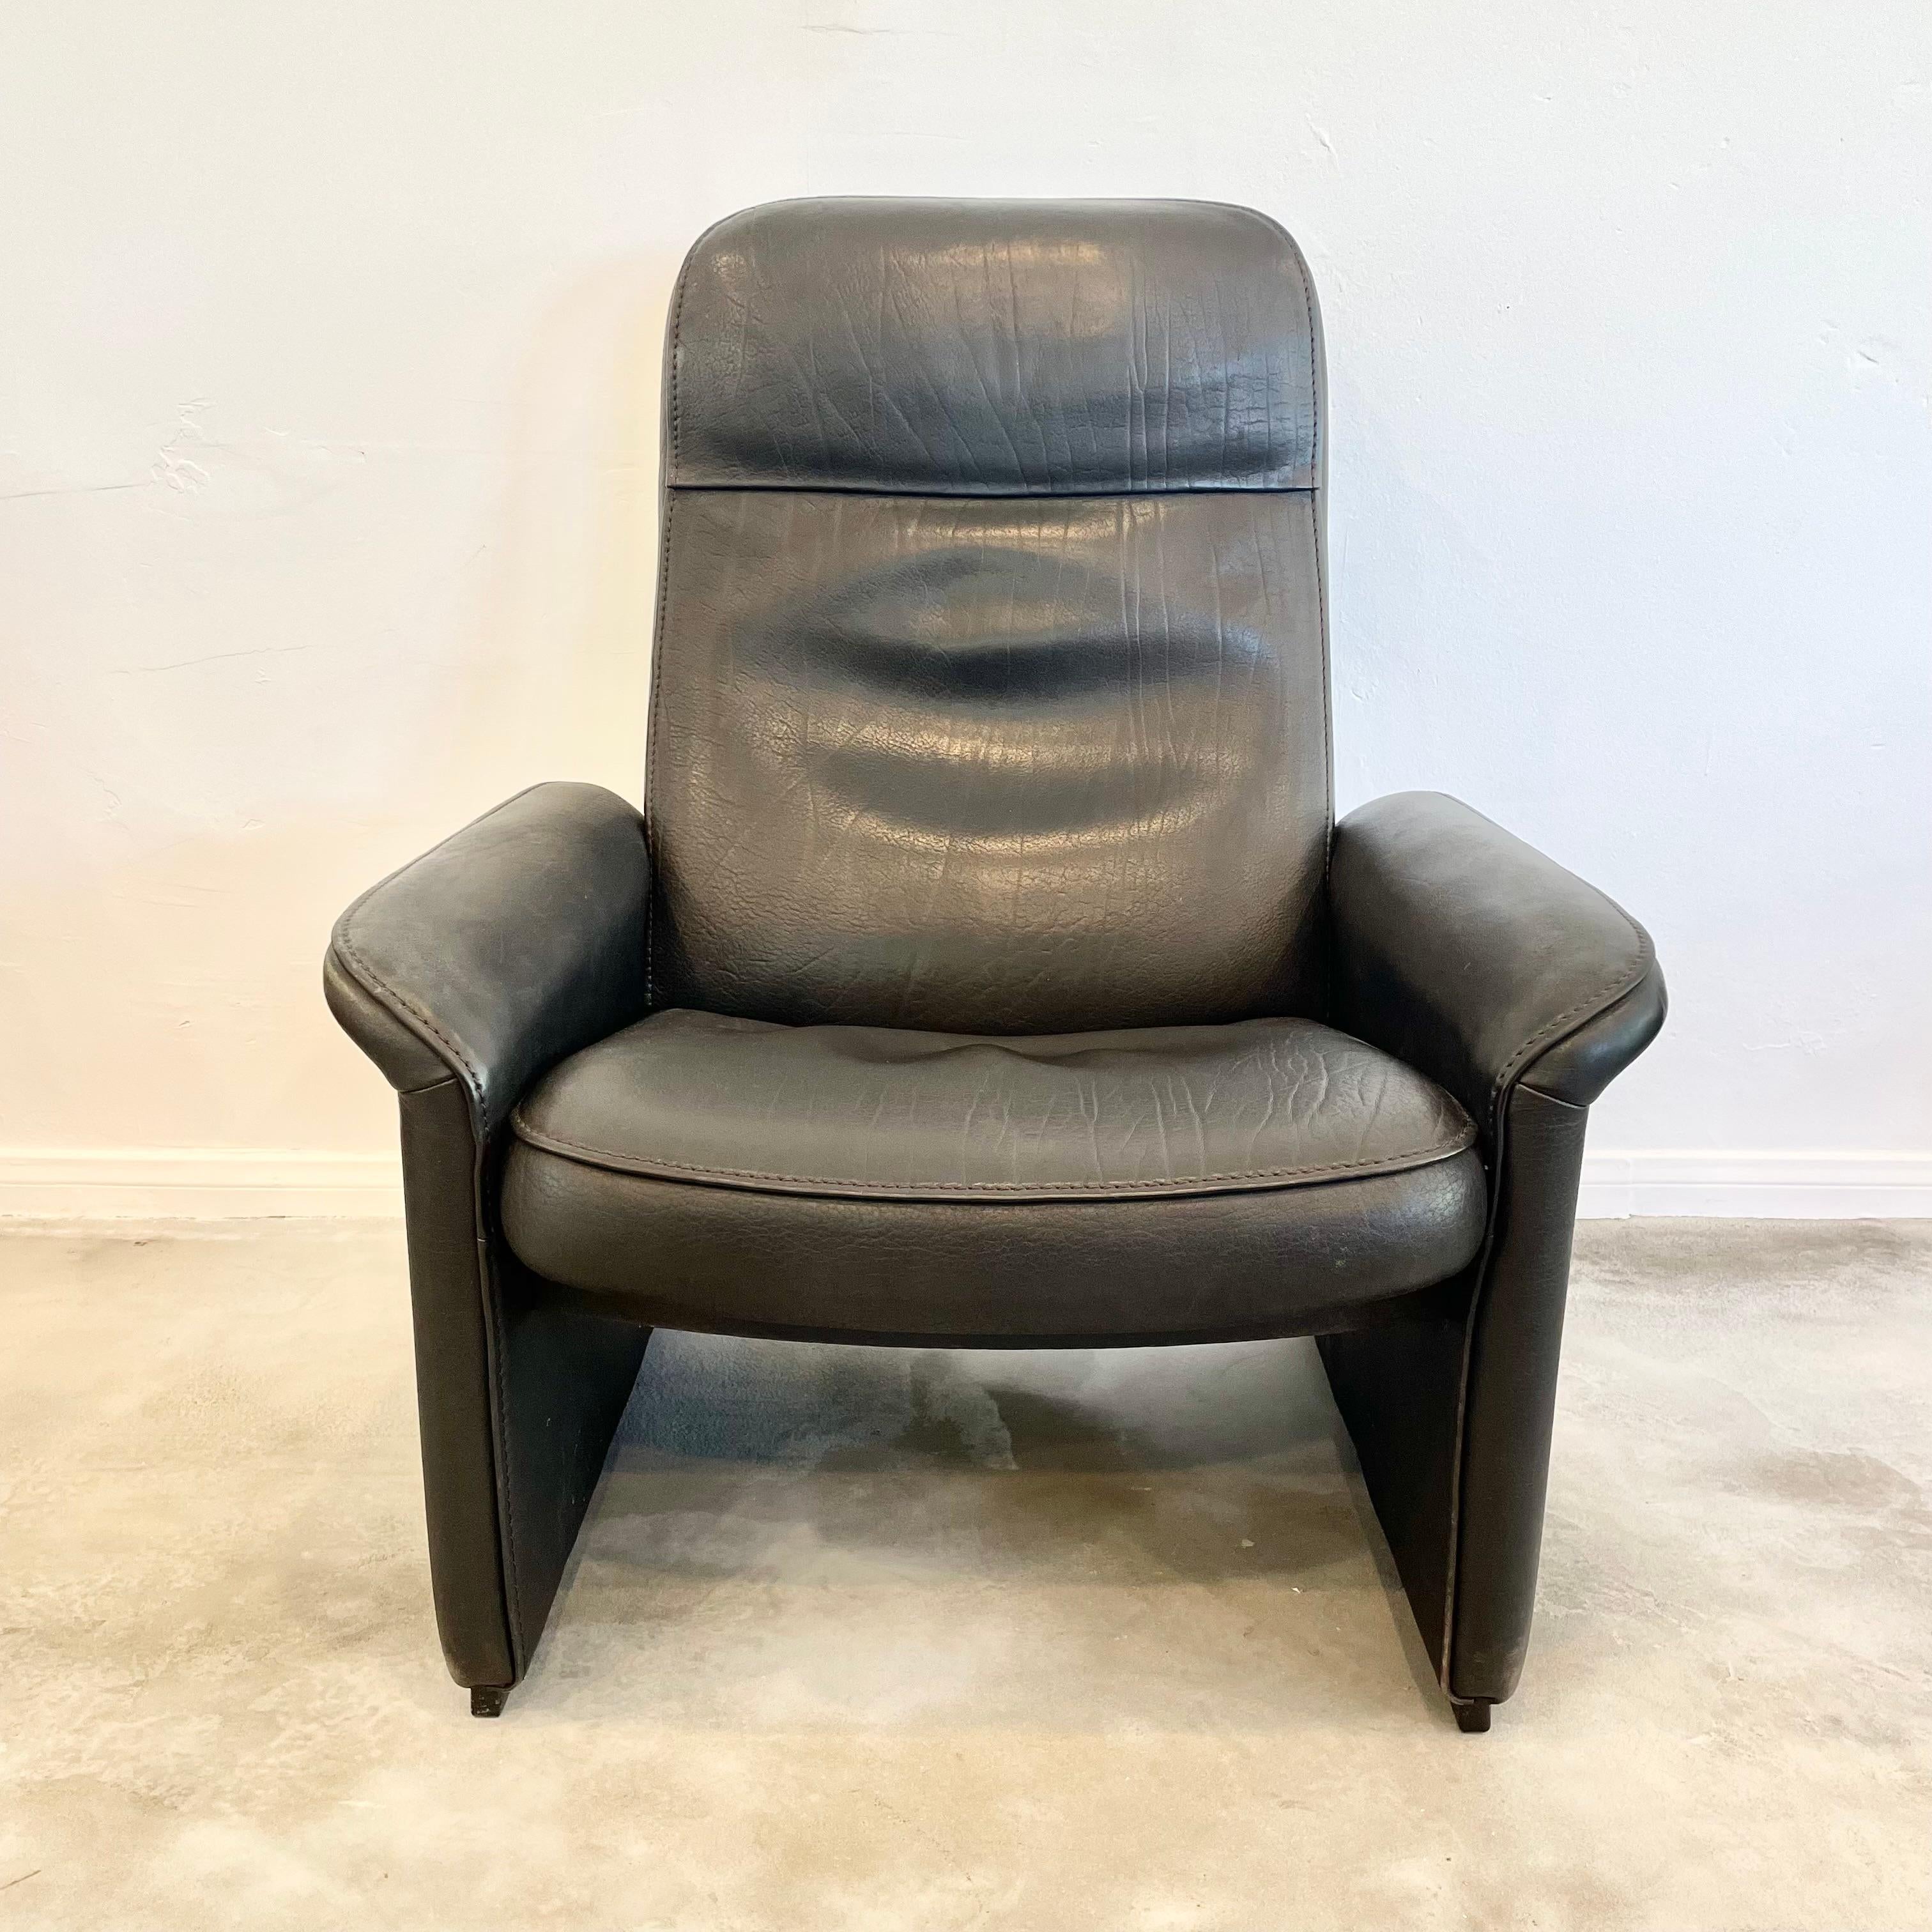 Pair of De Sede DS-50 Black Leather Recliner Chairs, 1970s Switzerland For Sale 4